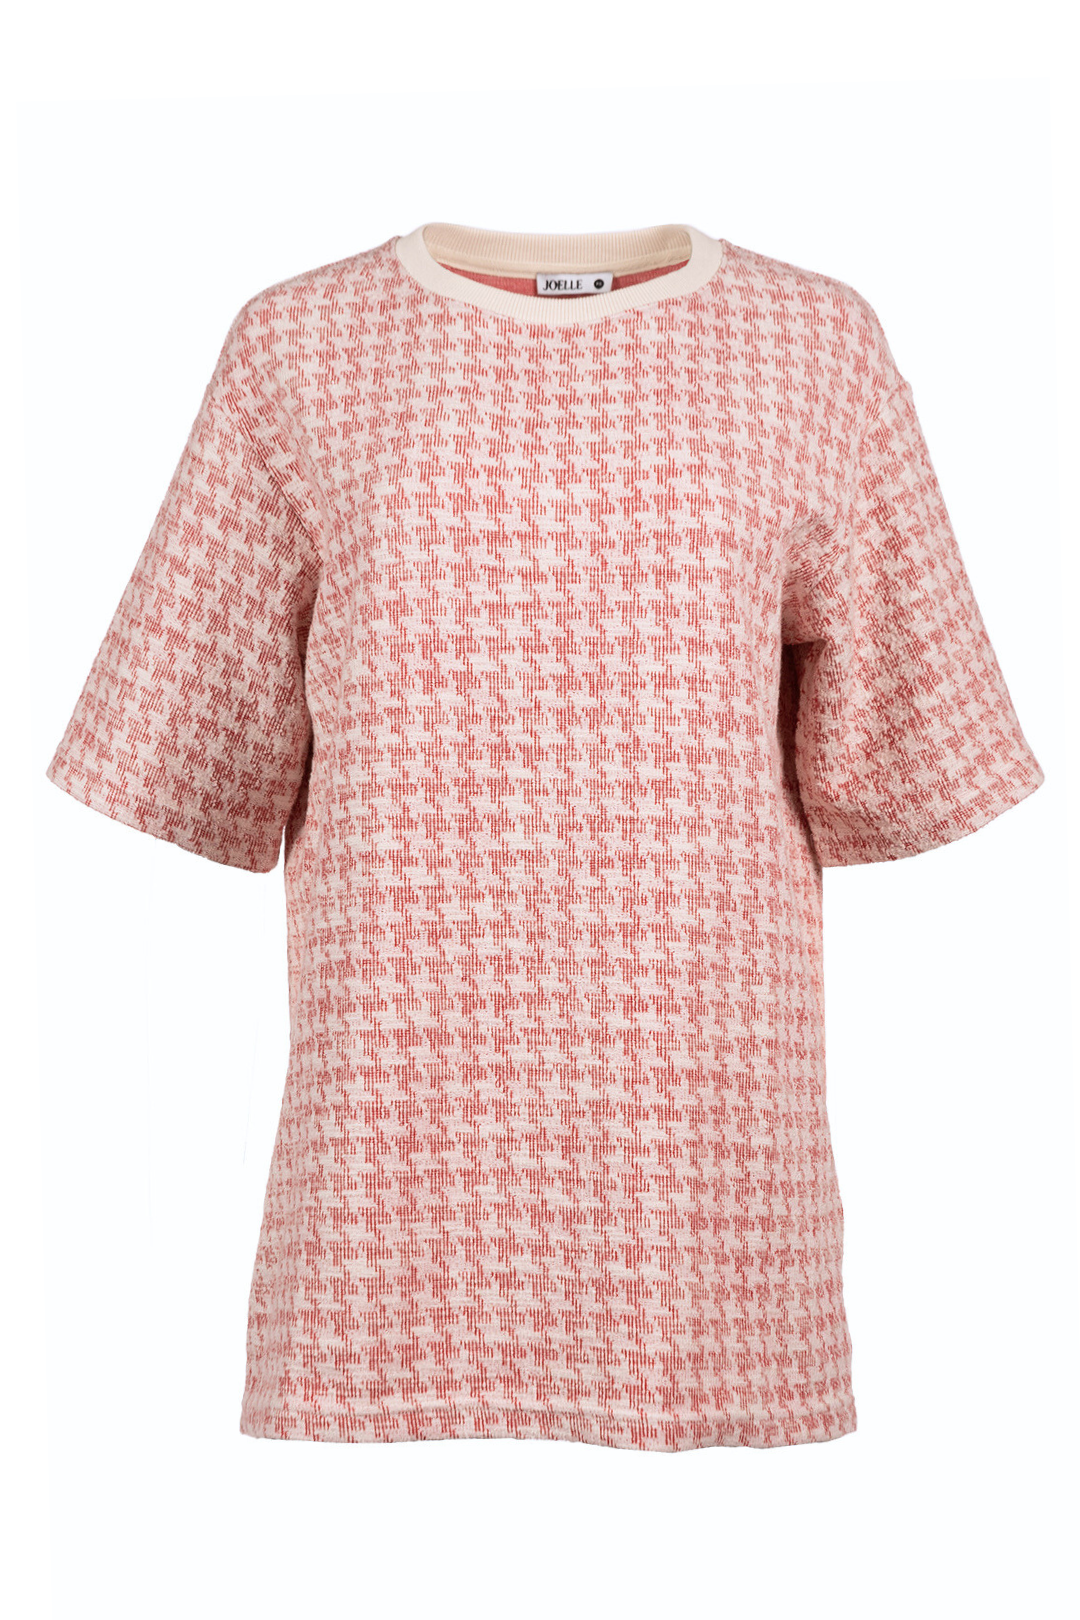 Loose-fitting red houndstooth pattern t-shirt | Karalie